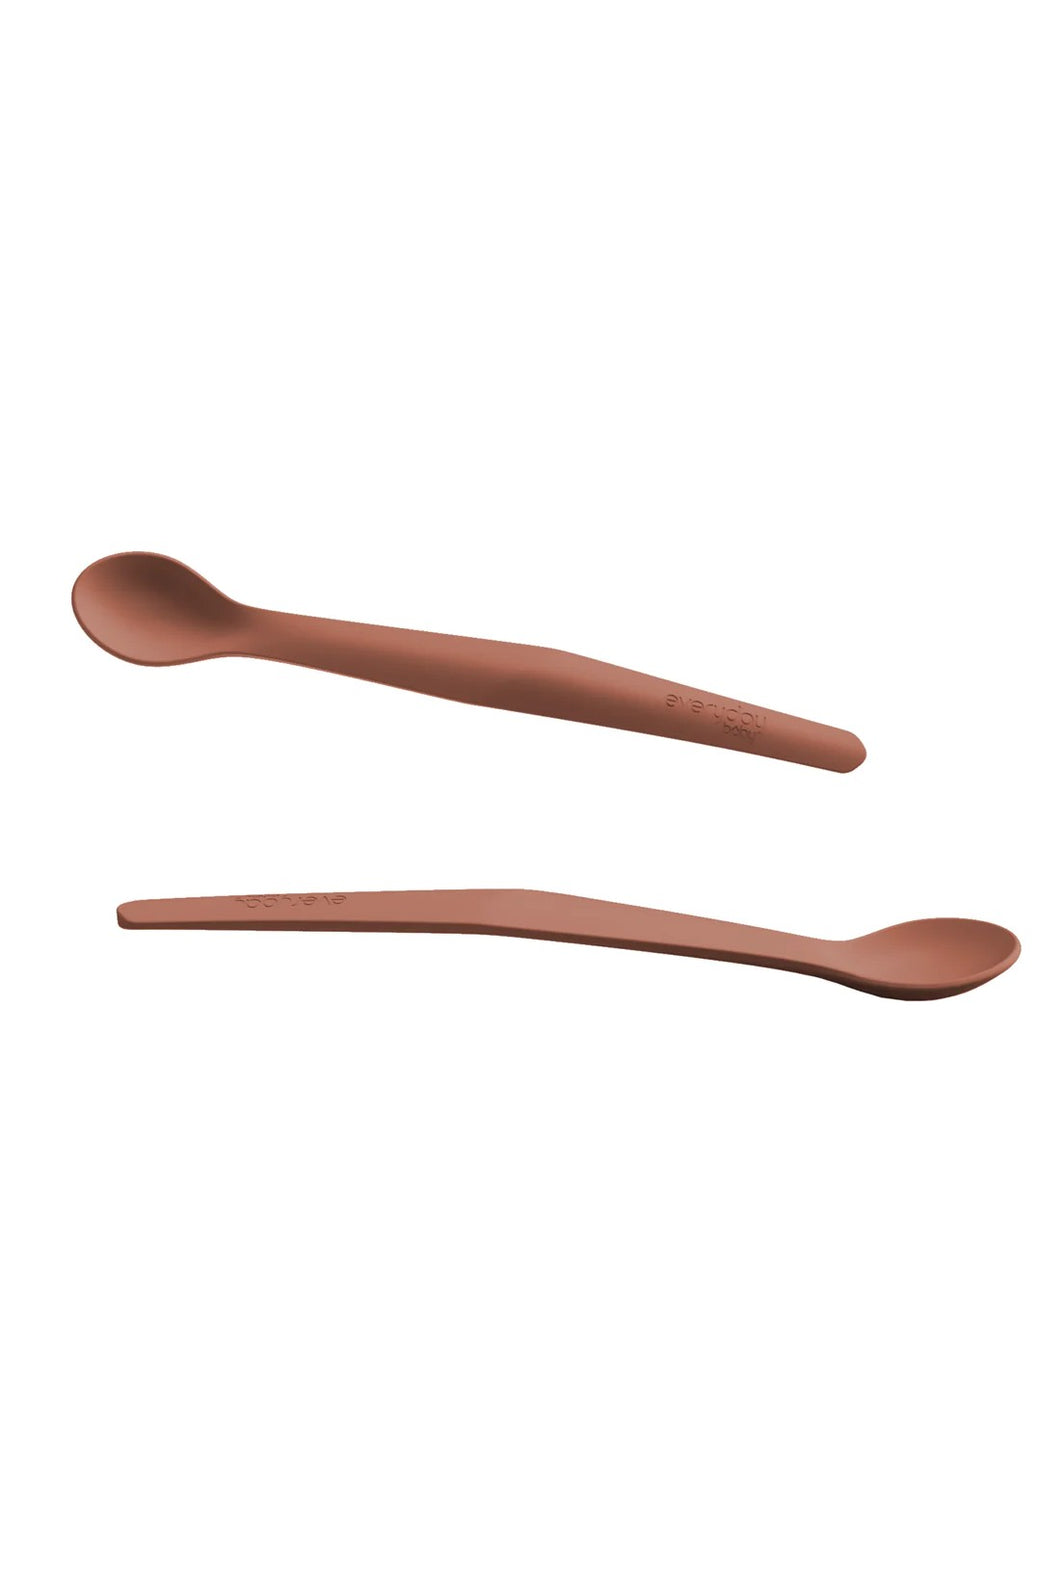 Everyday Baby Silicone Spoon -  2 Spoons